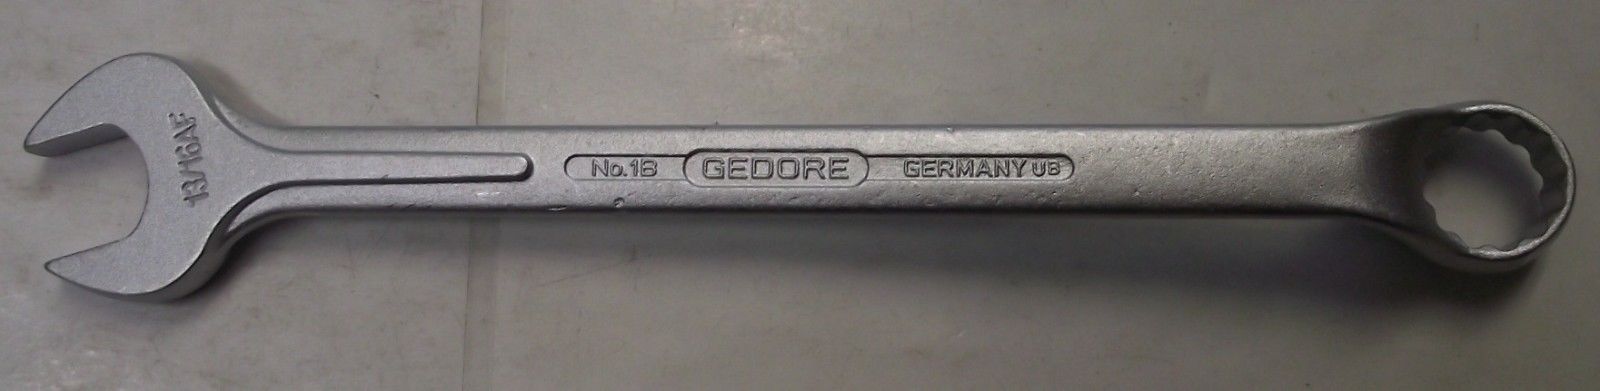 Gedore 6006040 13/16AF Combination Spanner Wrench Germany